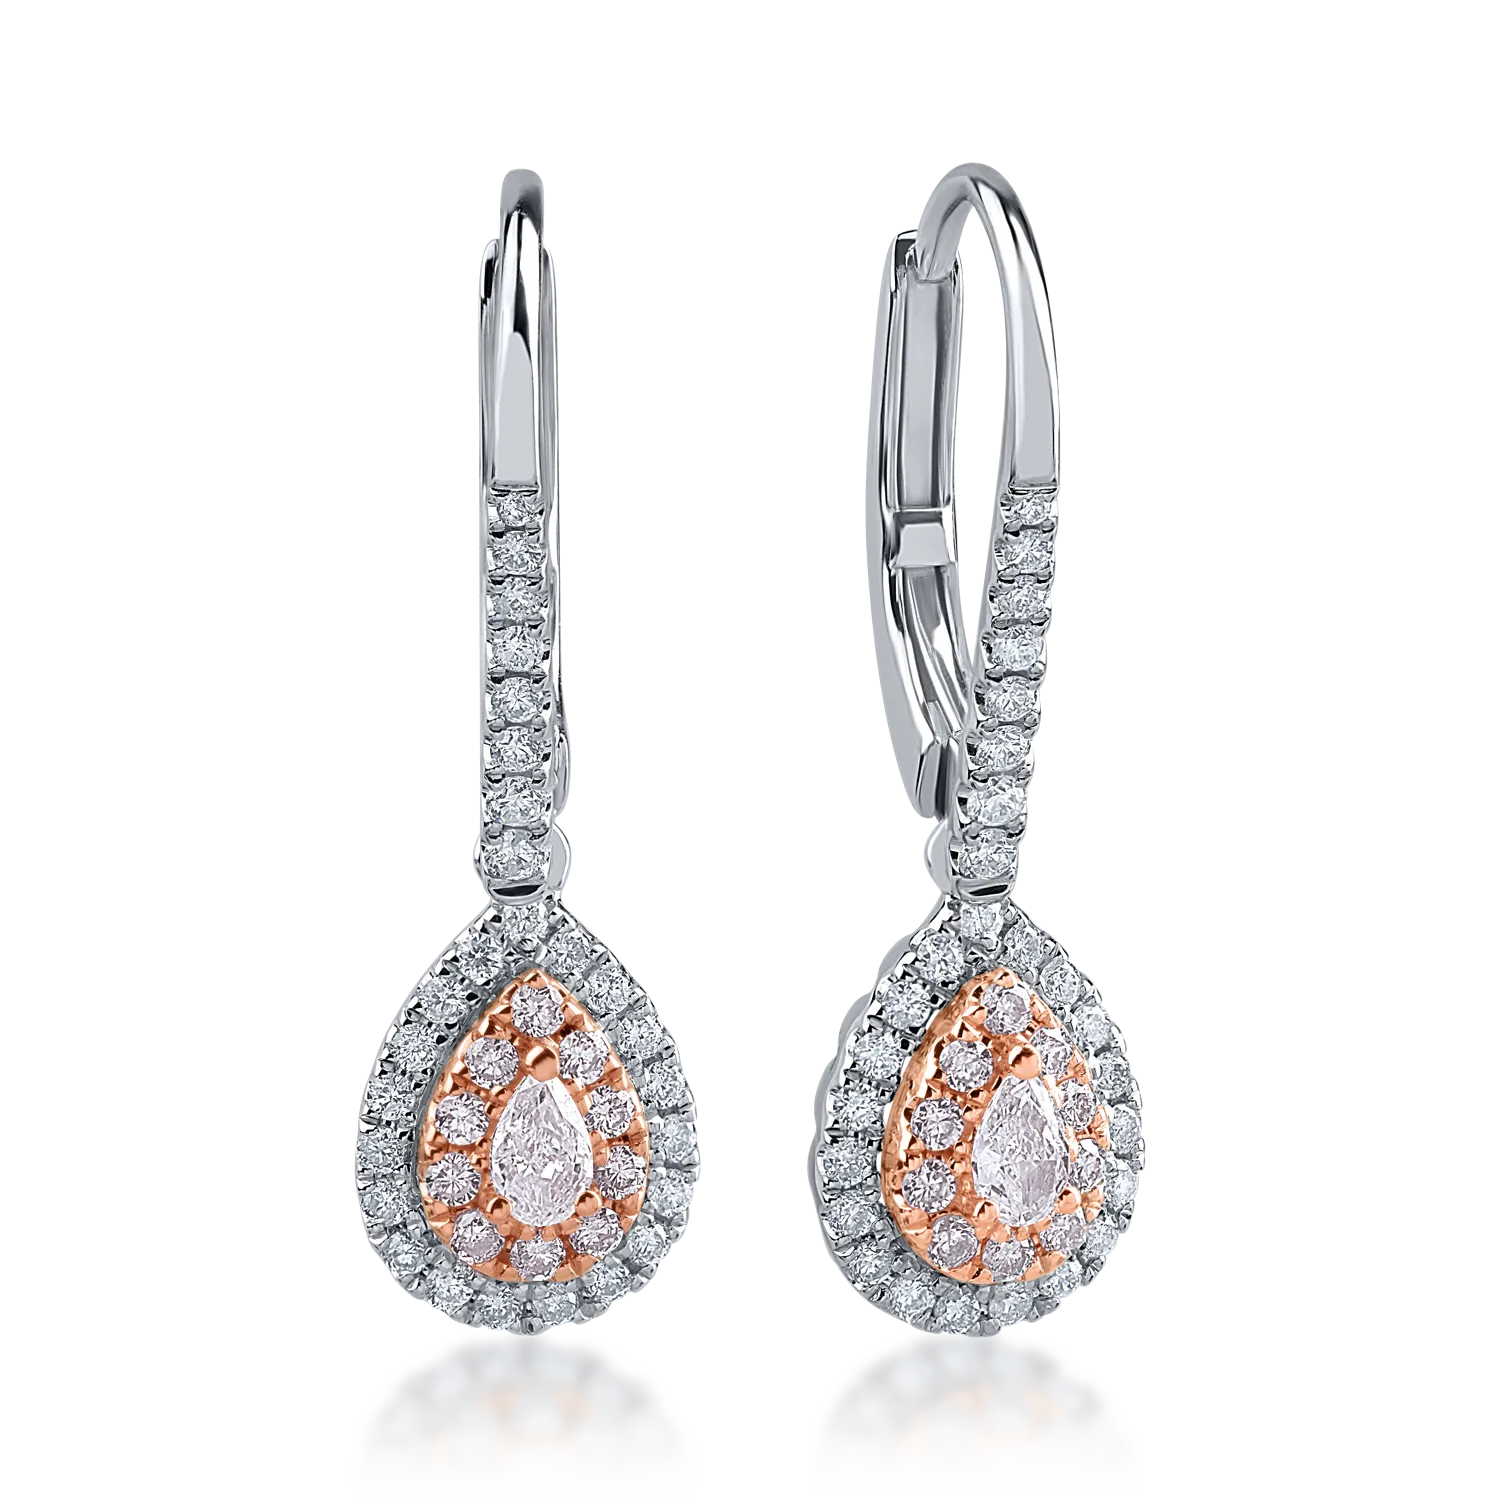 White-rose gold earrings with 0.38ct rose diamonds and 0.35ct clear diamonds